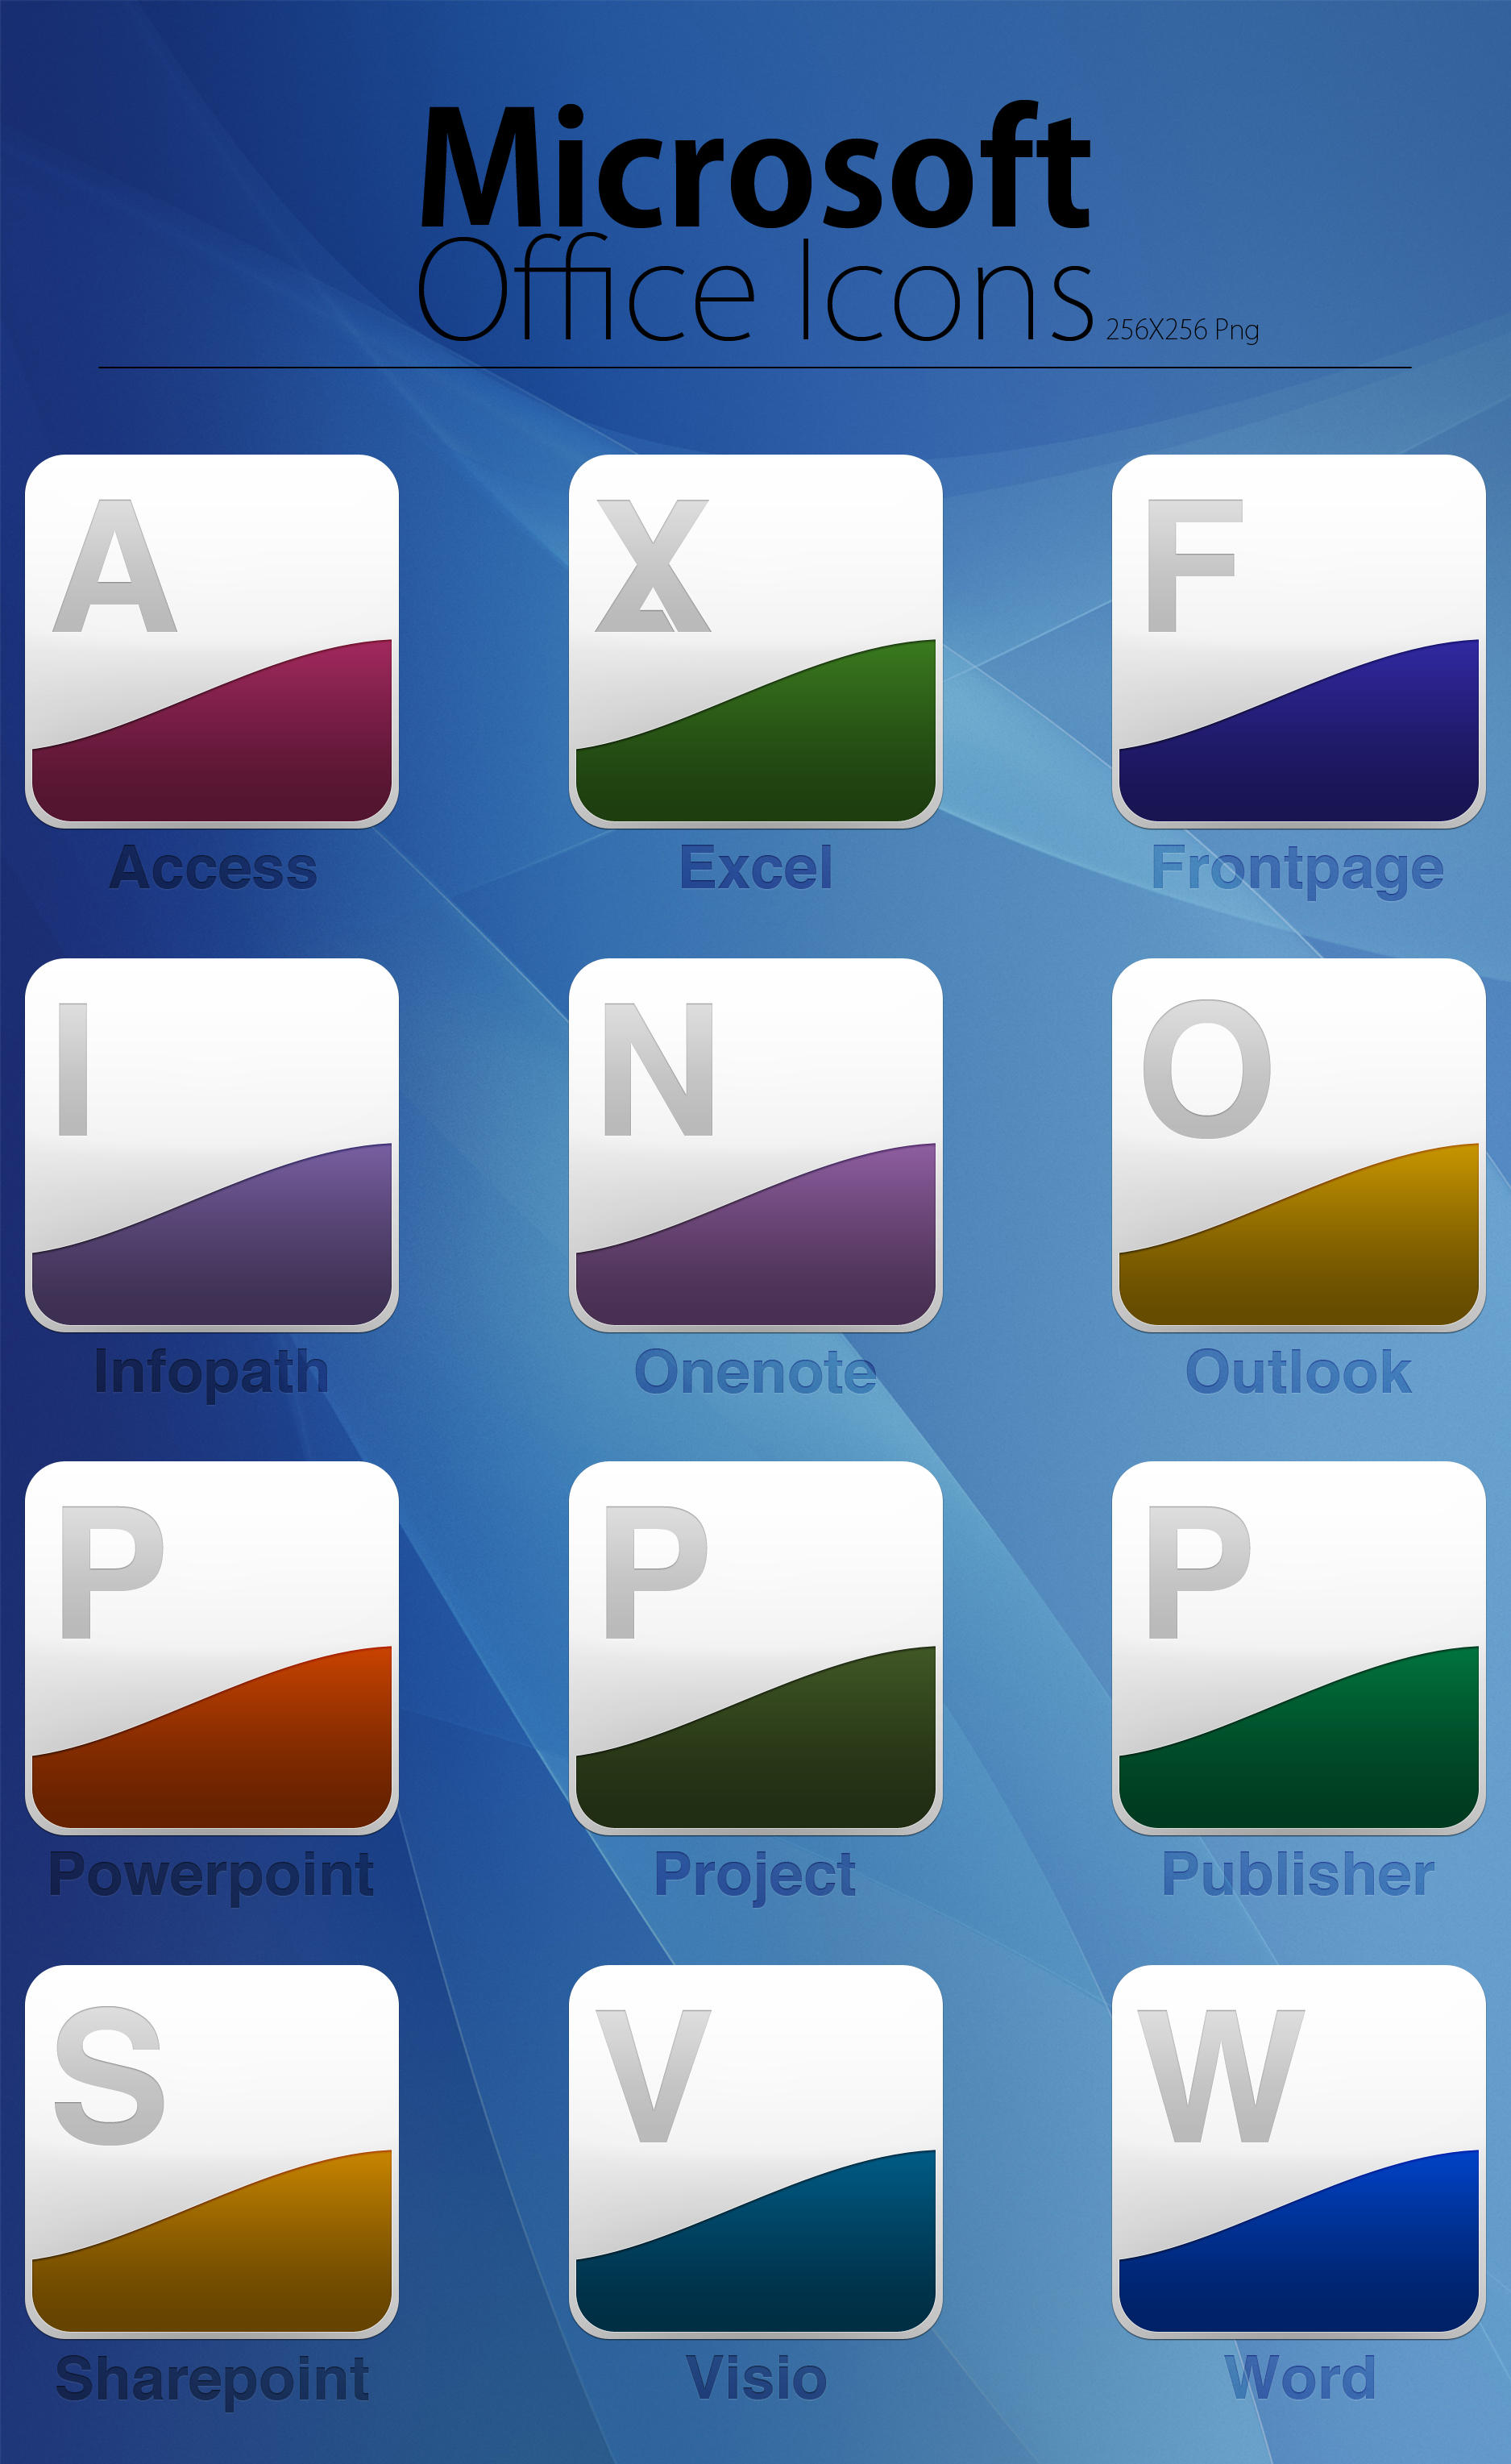 Microsoft Office Icons Not Displaying Correctly